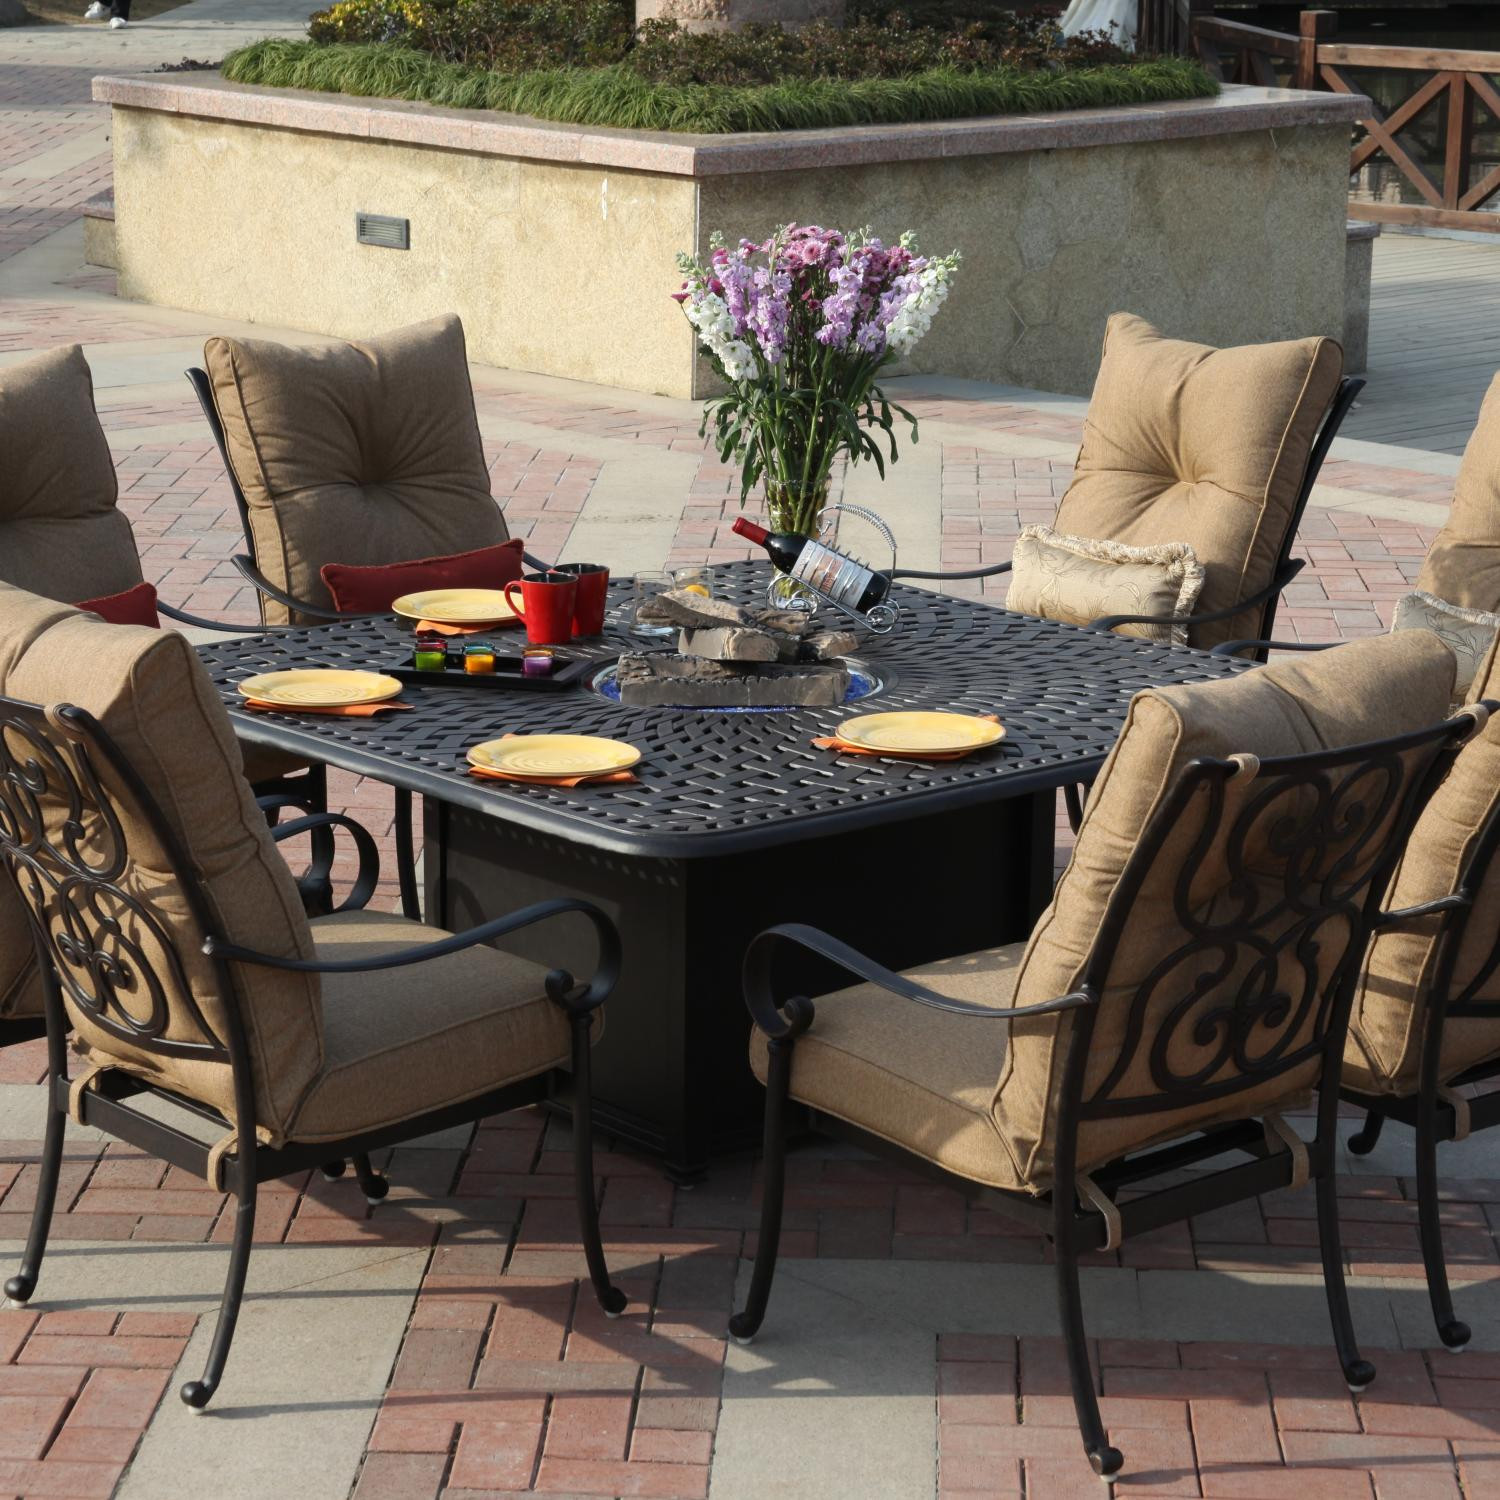 Patio Sets With Fire Pit
 Darlee Santa Anita 9 Piece Patio Fire Pit Dining Set